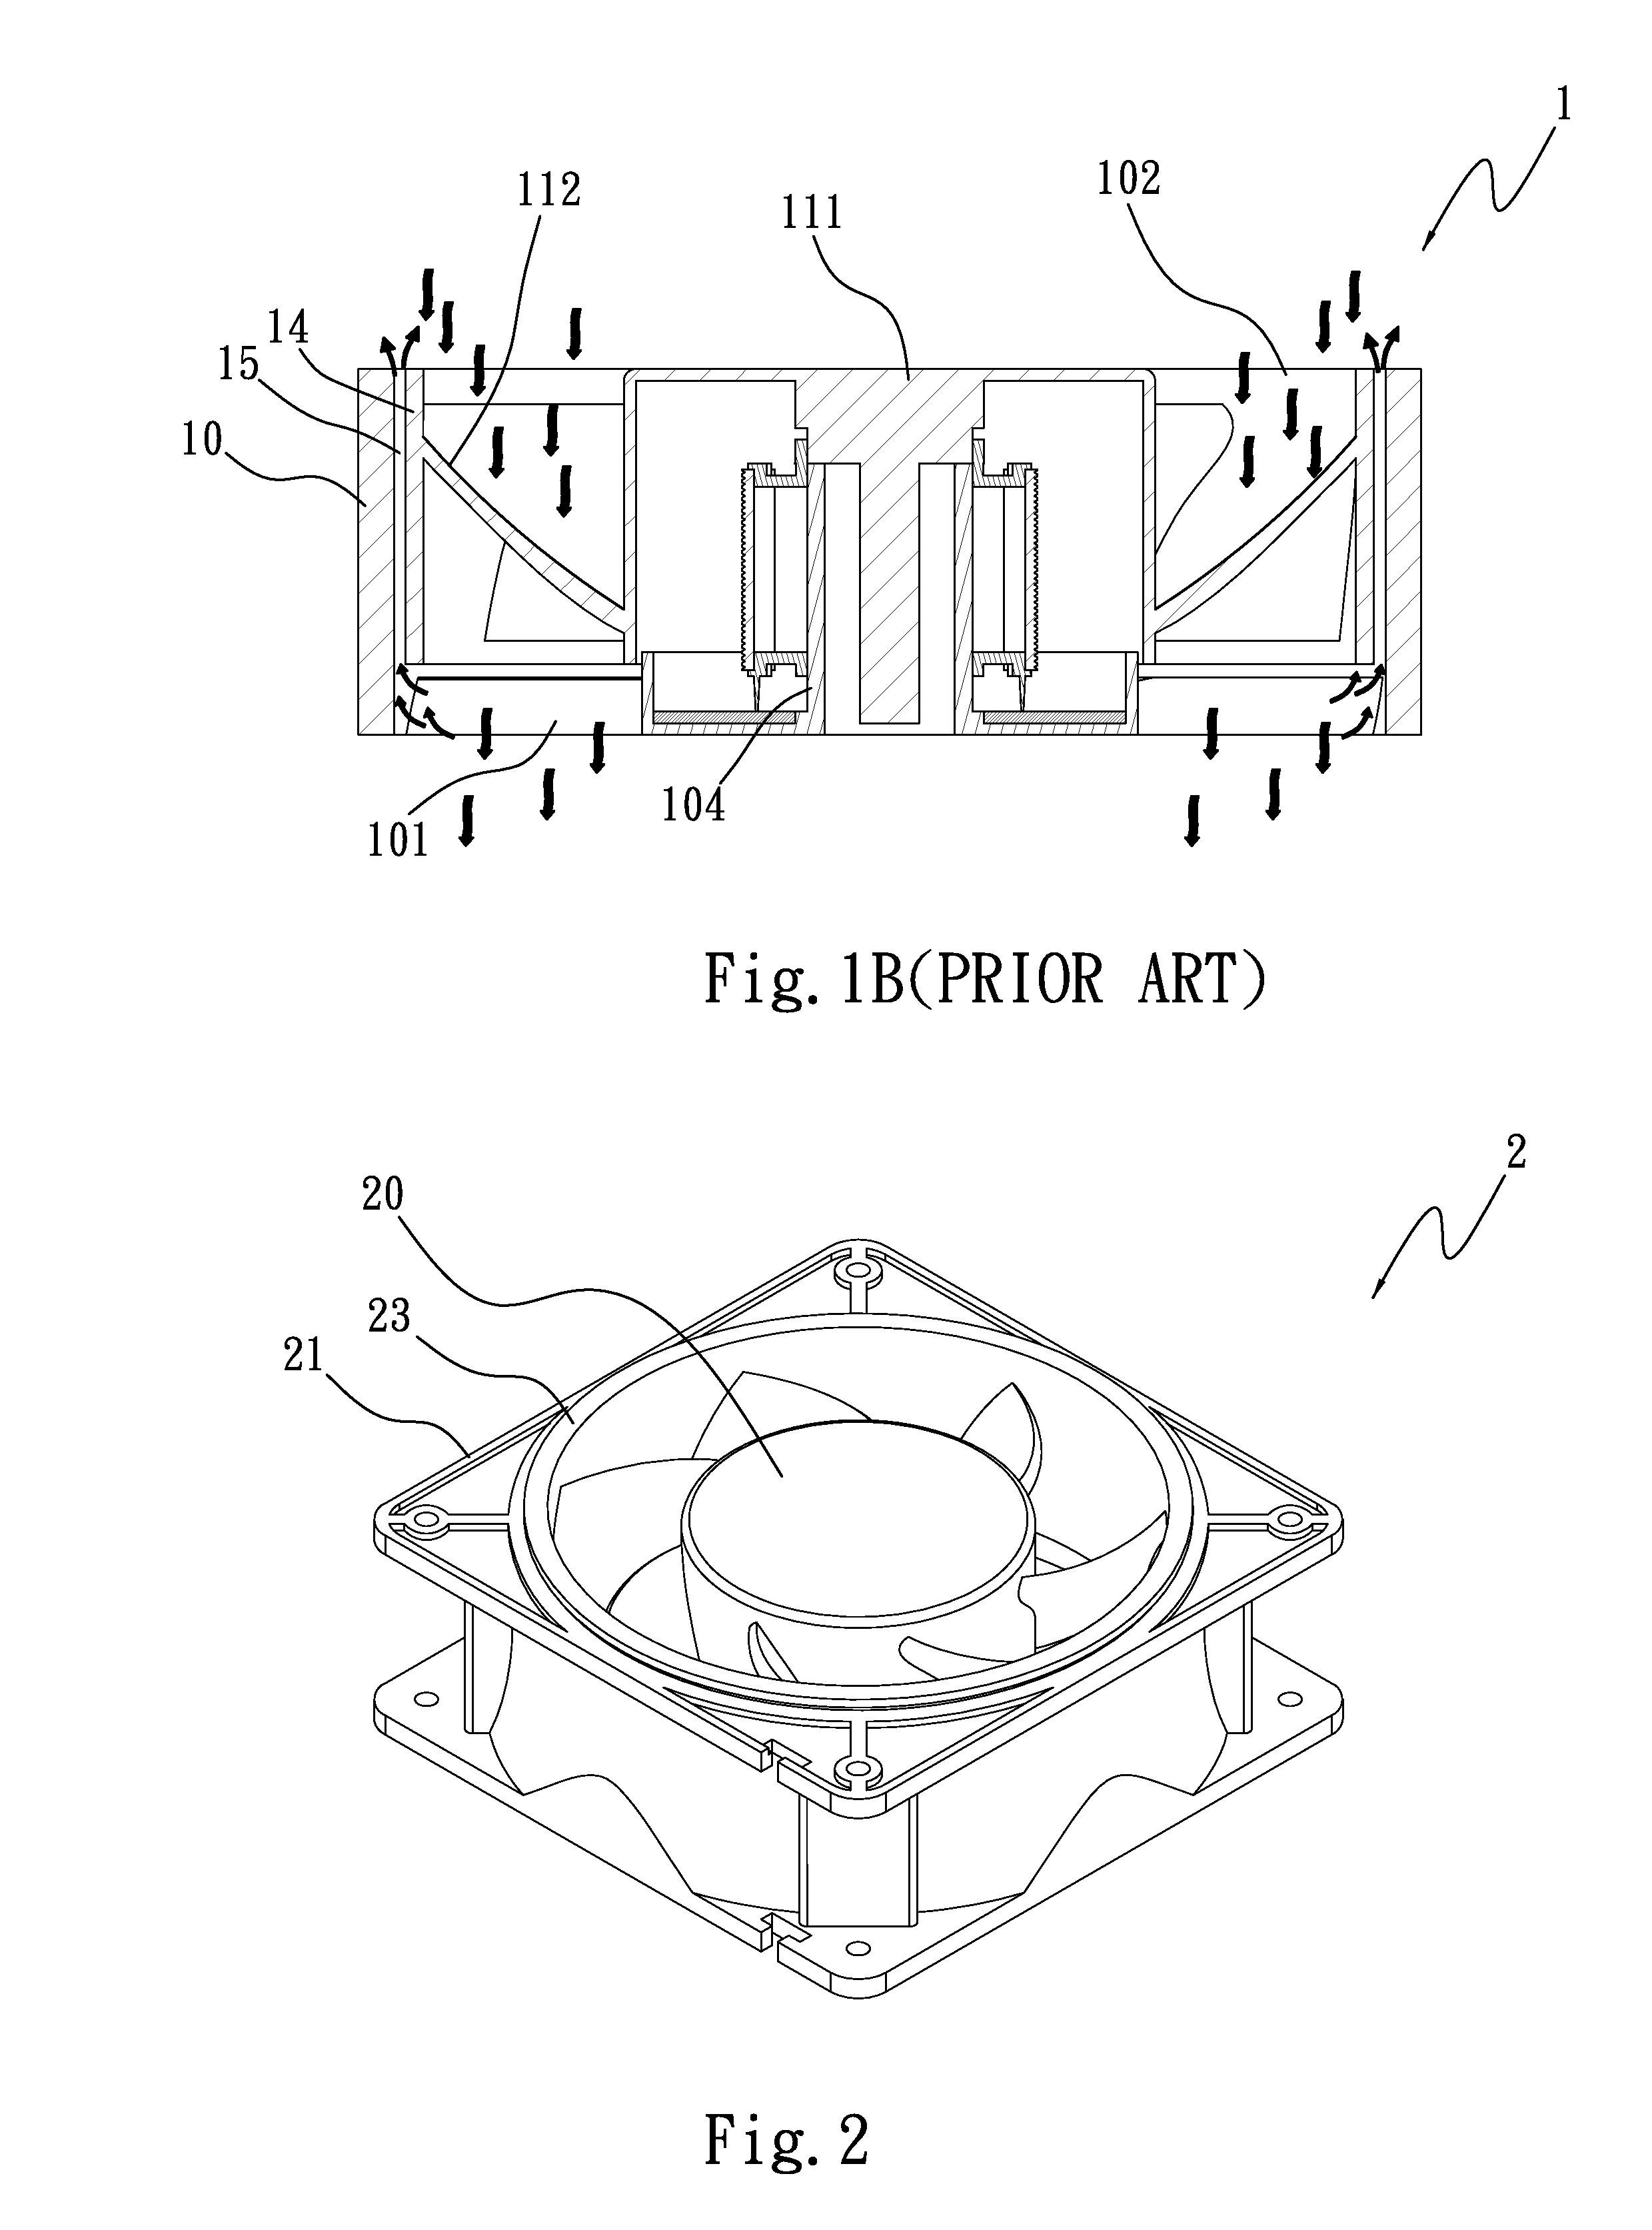 Frame assembly of ring-type fan with pressure-releasing function